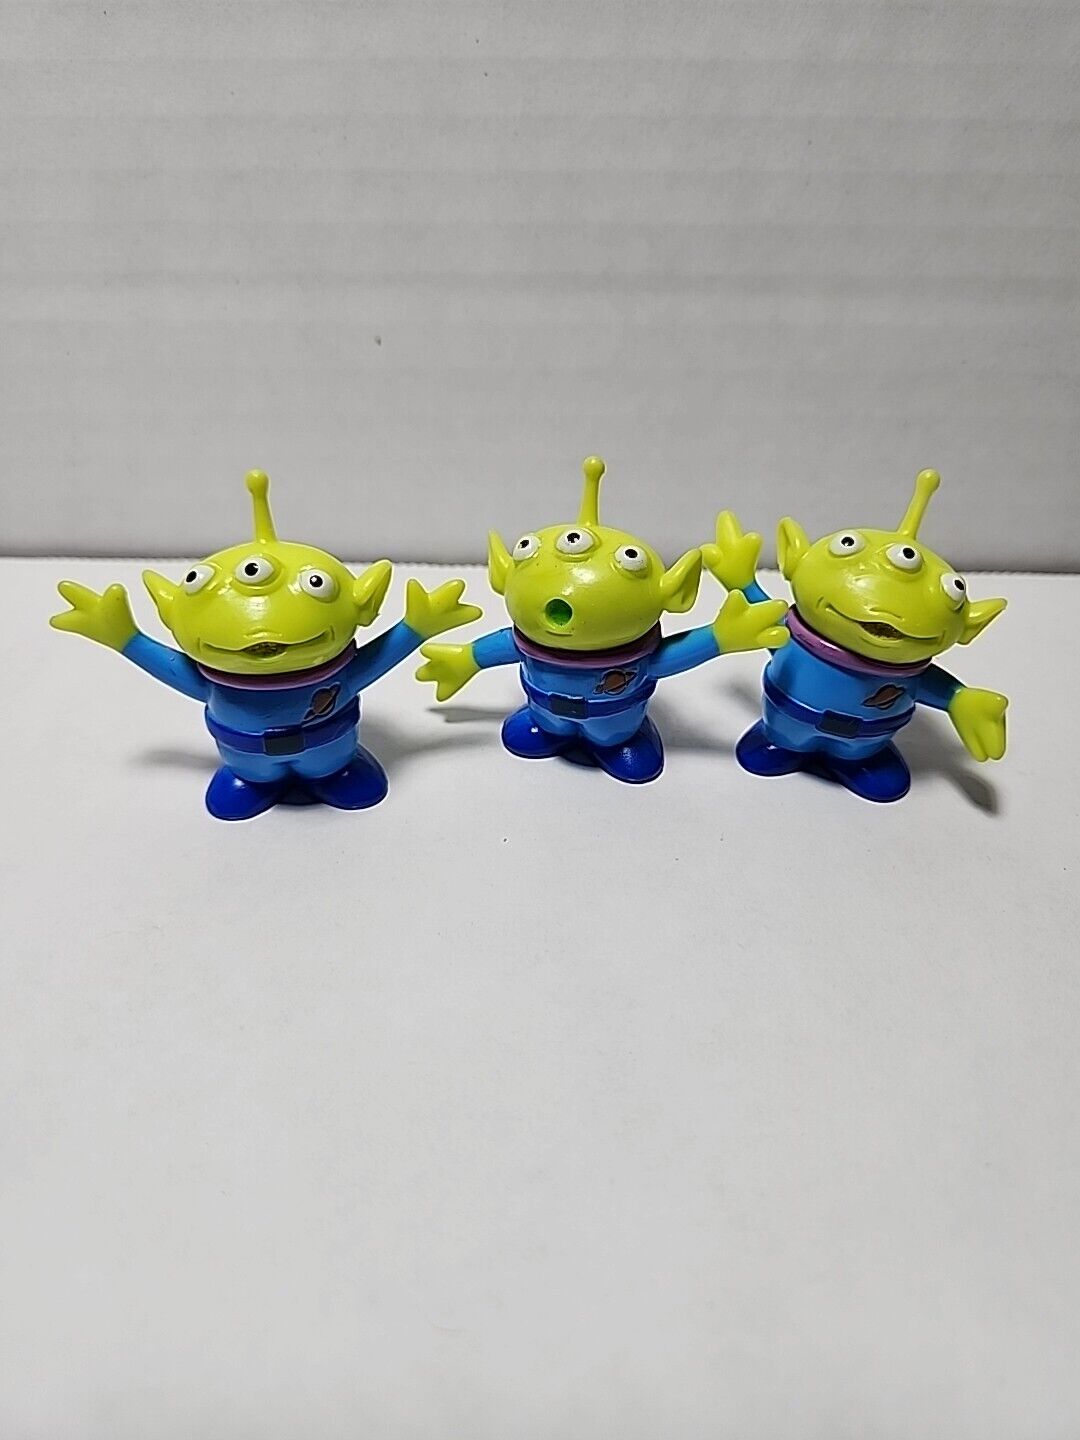 Toy Story Claw Machine Aliens Toy Figures Set Of 3 Disney Pixar 1.75" Preowned 